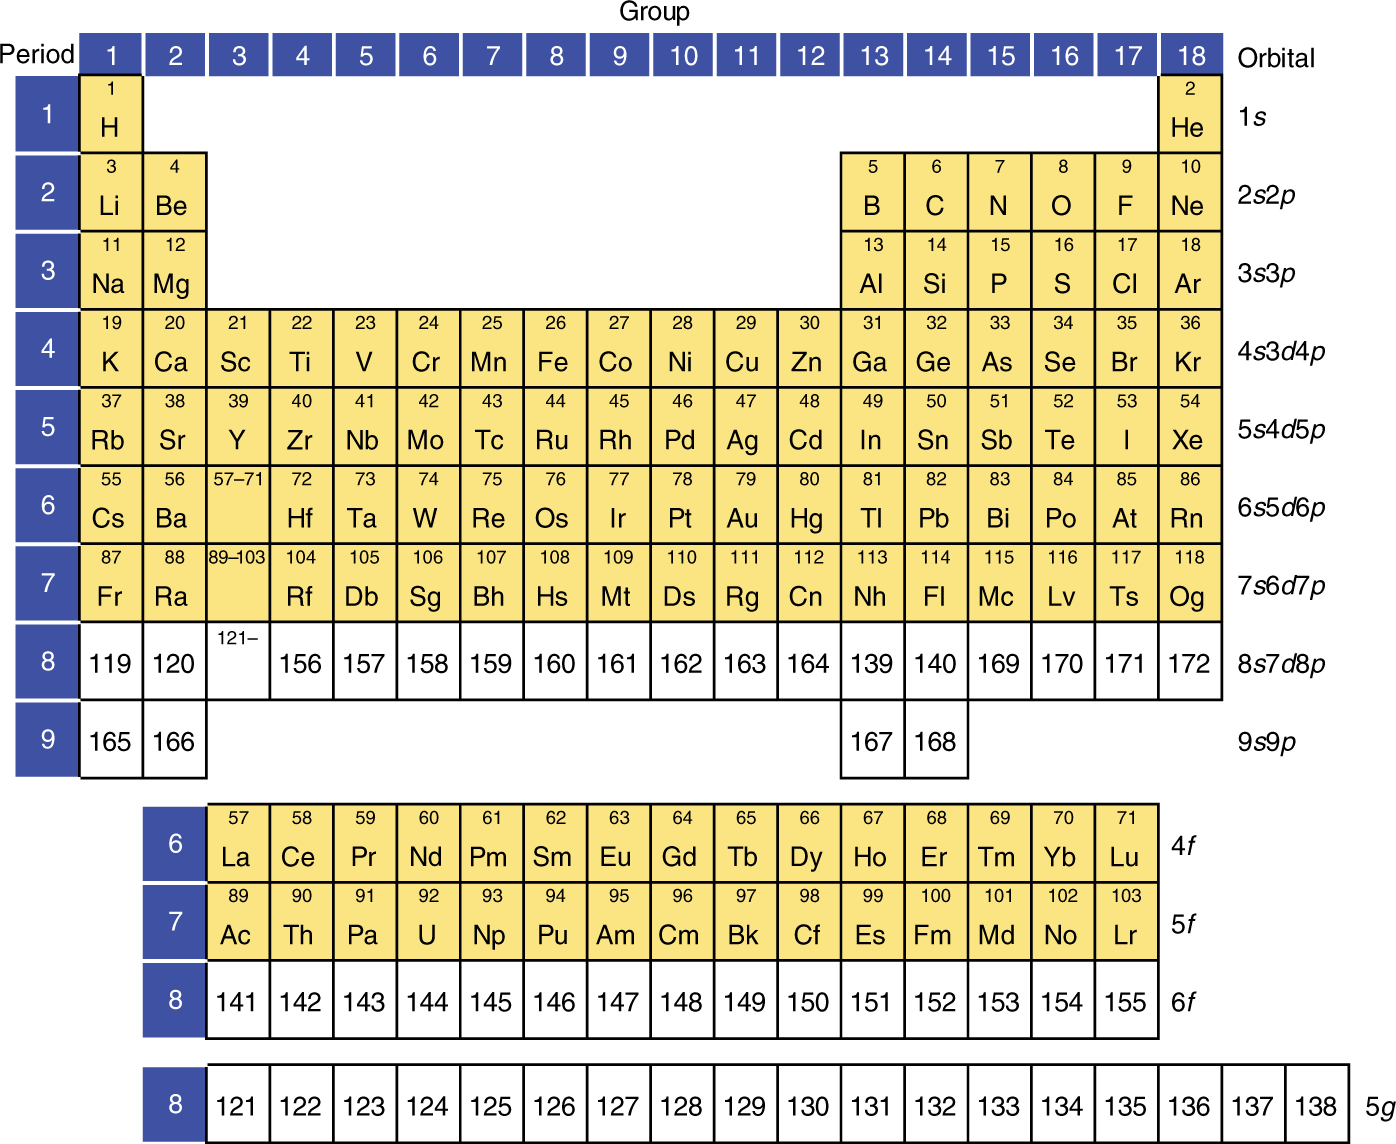 The Name Of The Heaviest Element On The Chart